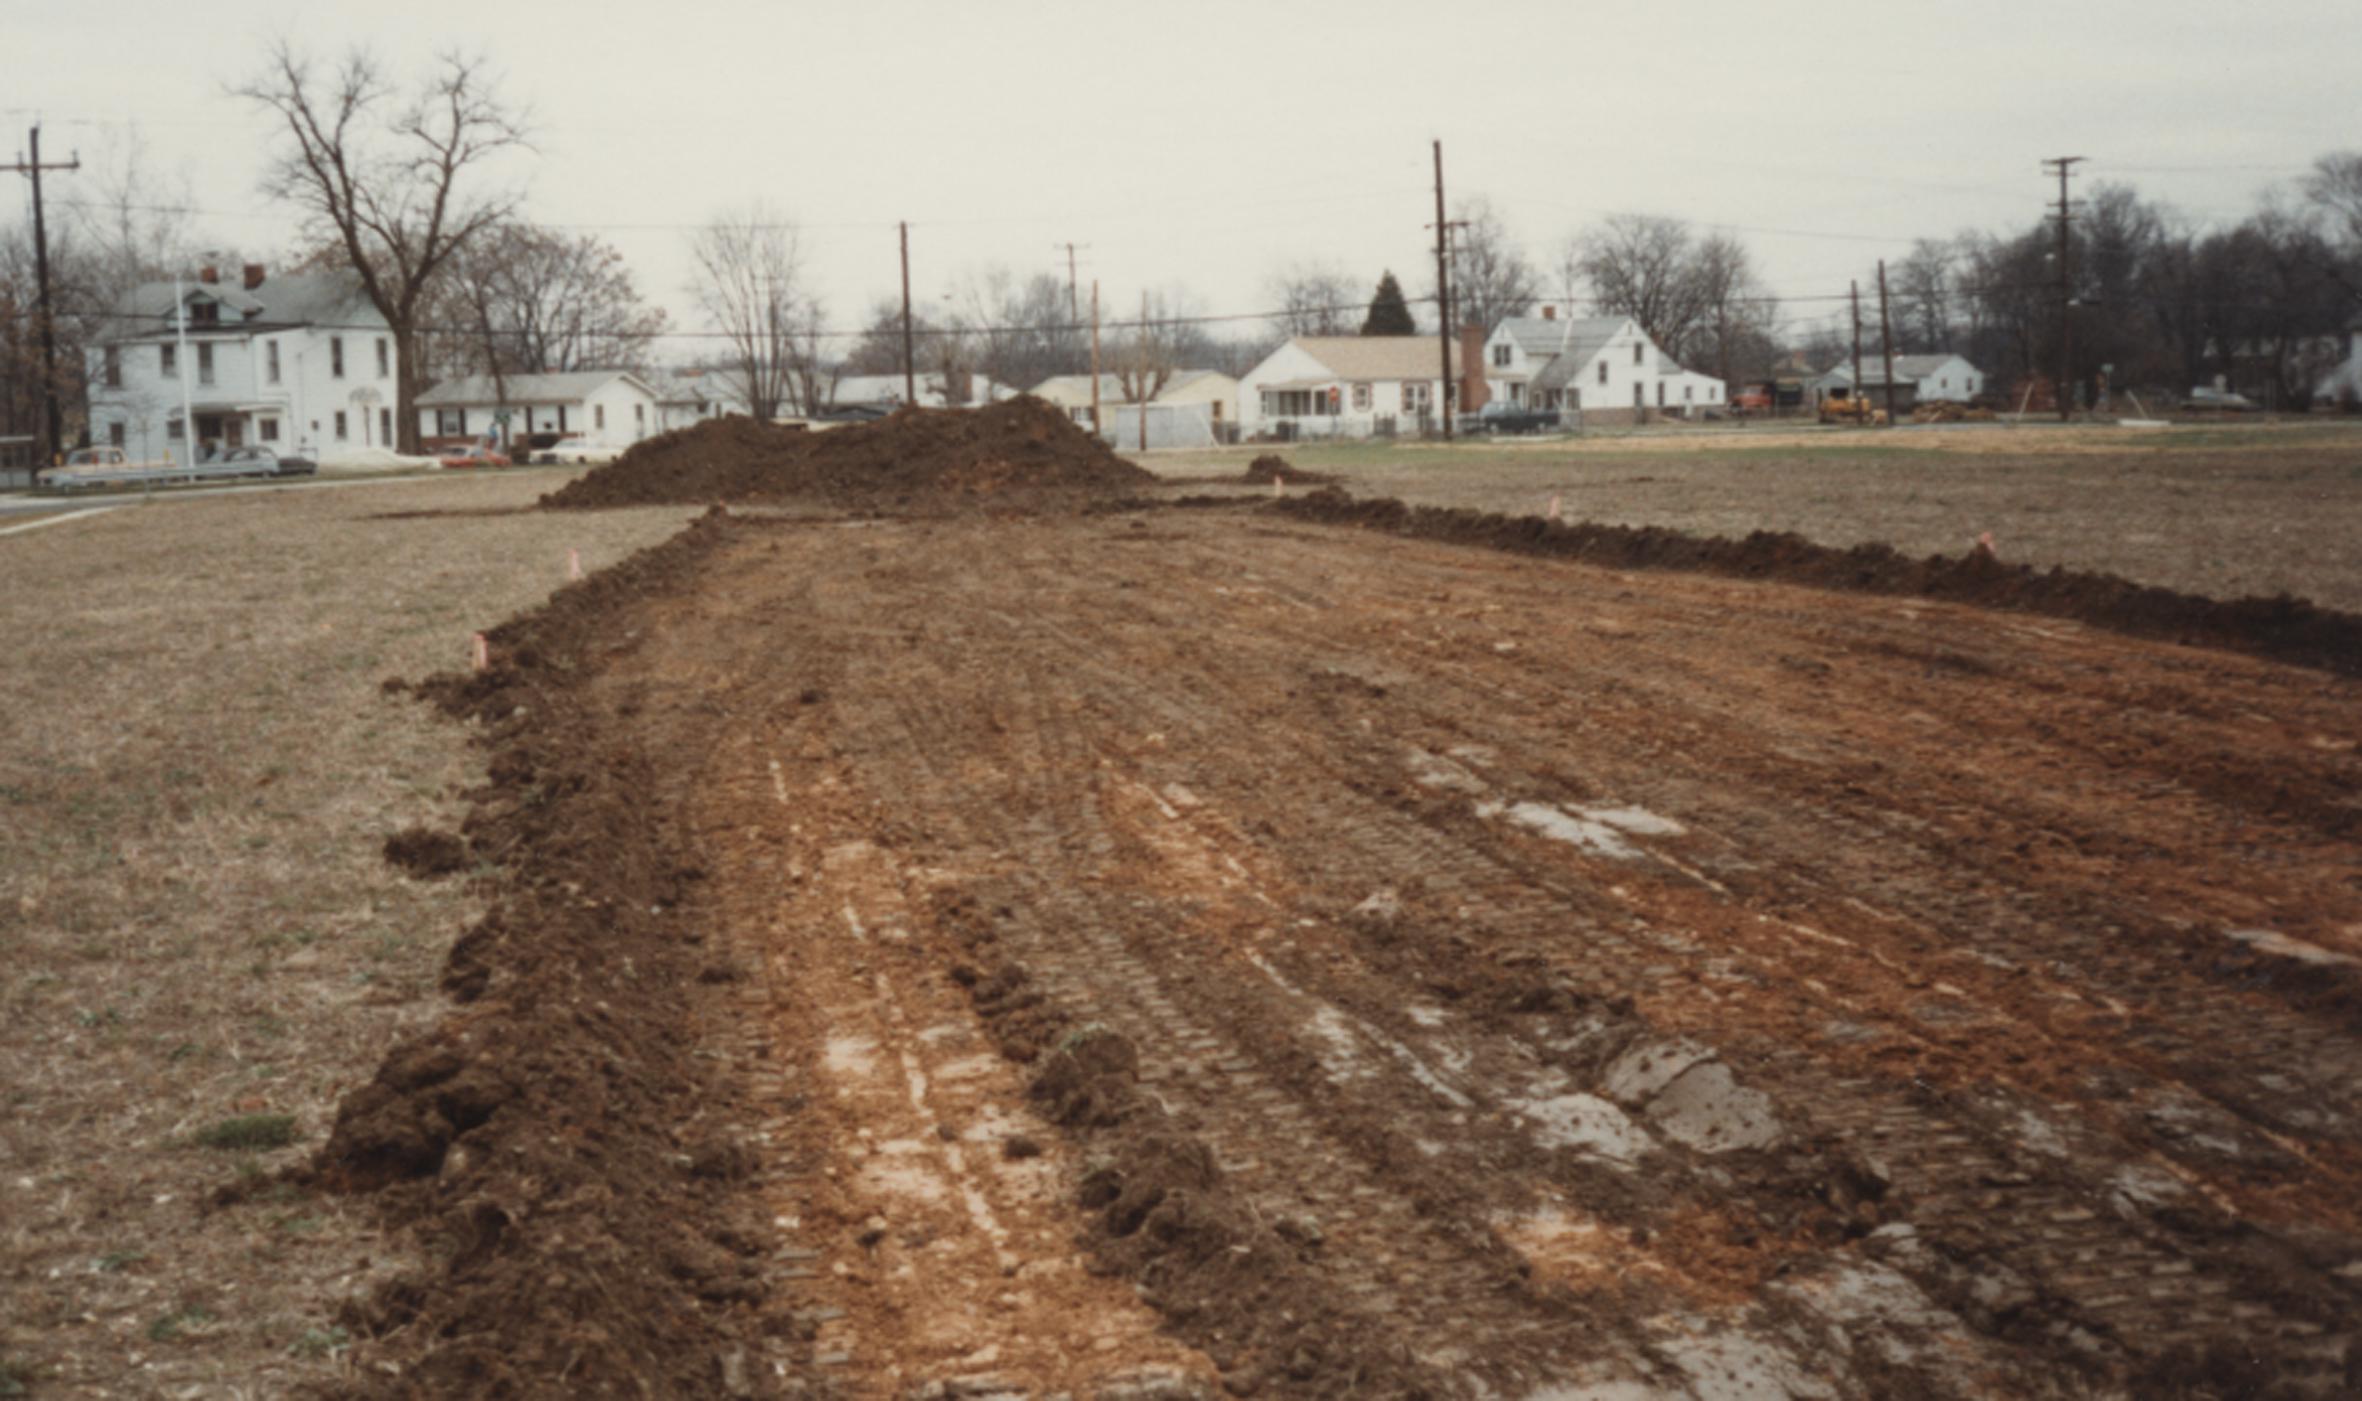 Land being prepared for building